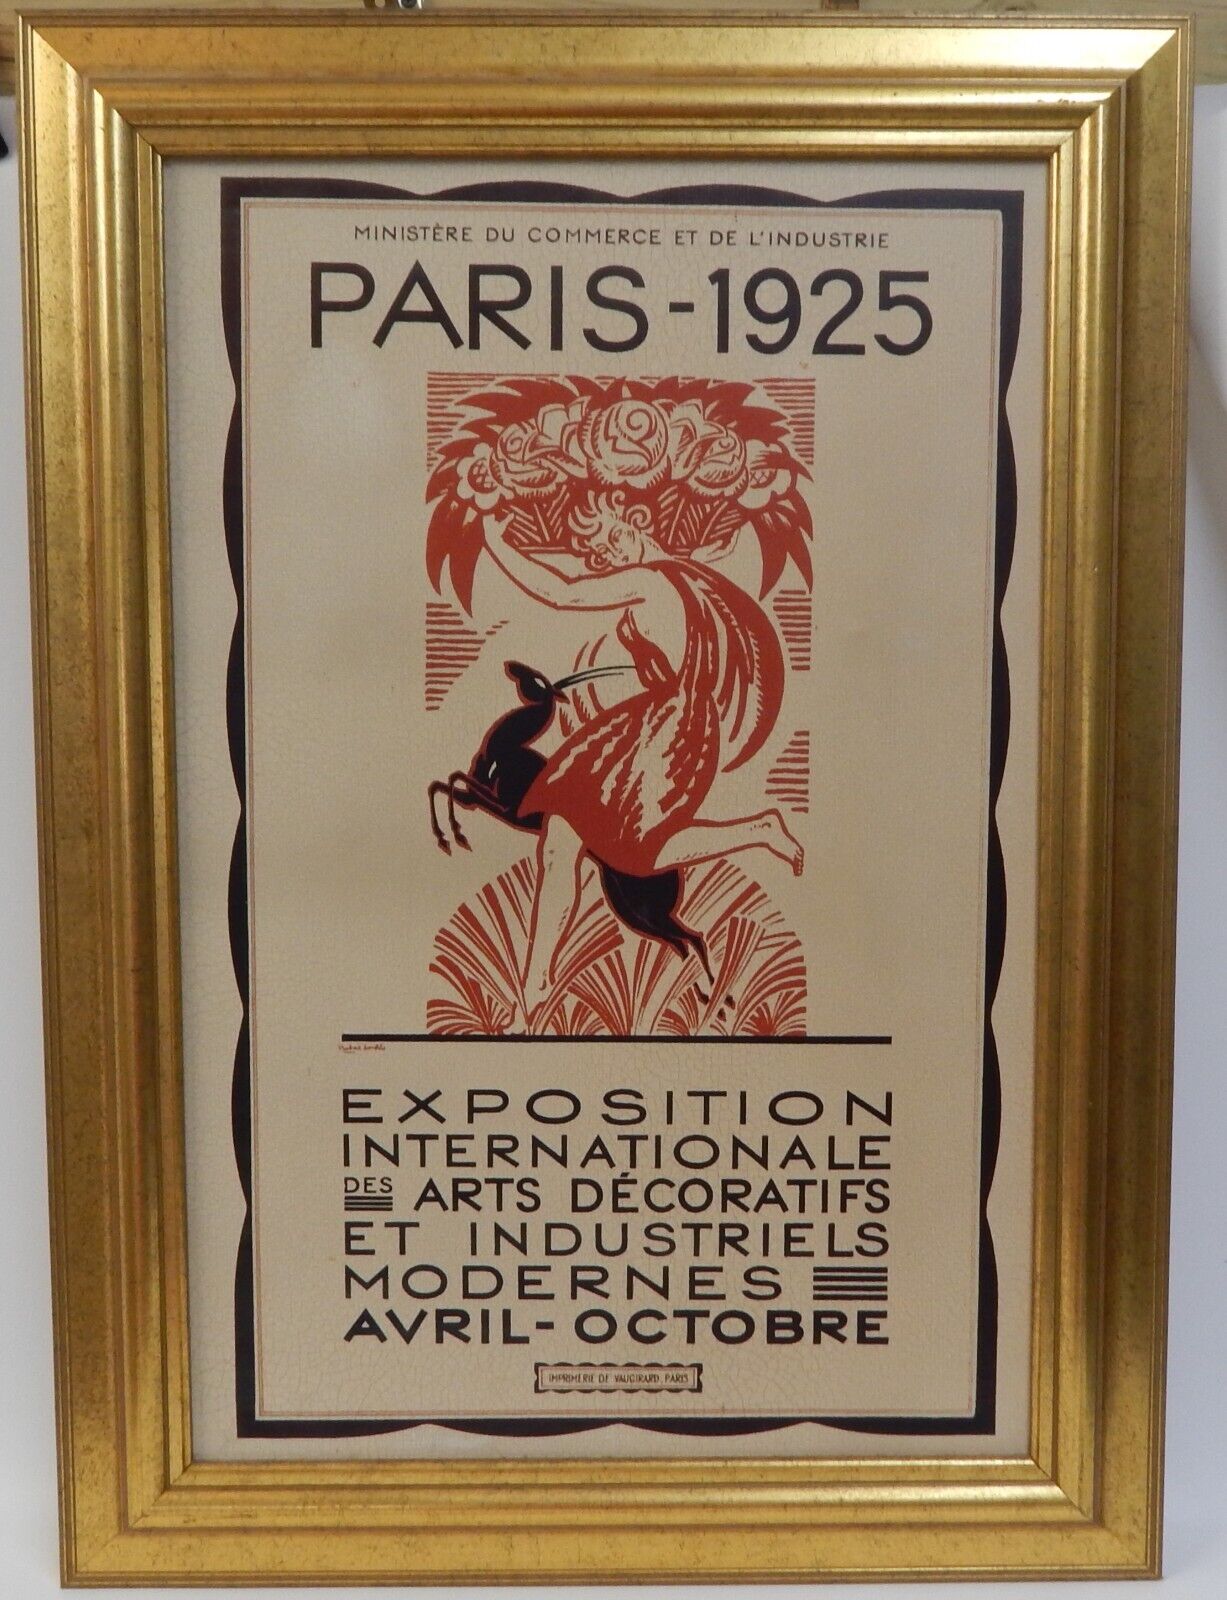 Paris 1925 Modern Decorative and Industrial Arts Expo Large Framed Canvas Art